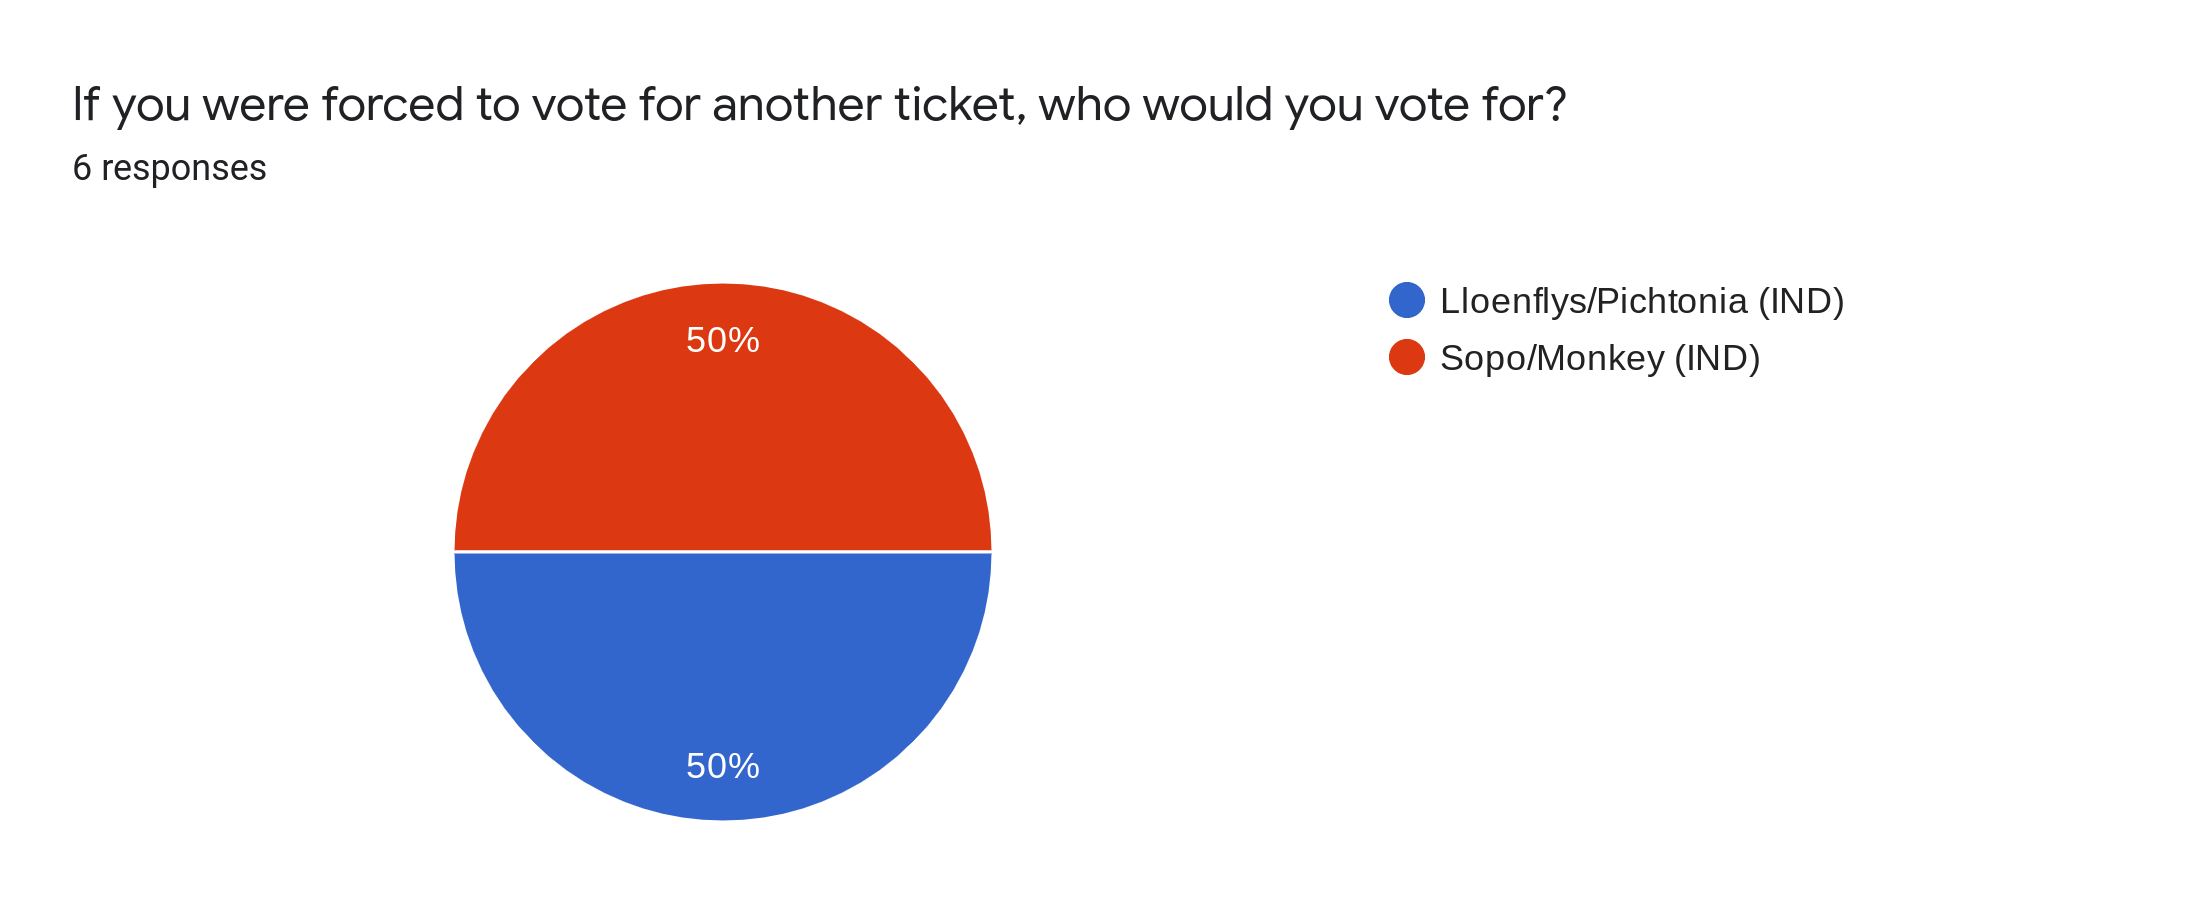 Forms response chart. Question title: If you were forced to vote for another ticket, who would you vote for?. Number of responses: 6 responses.